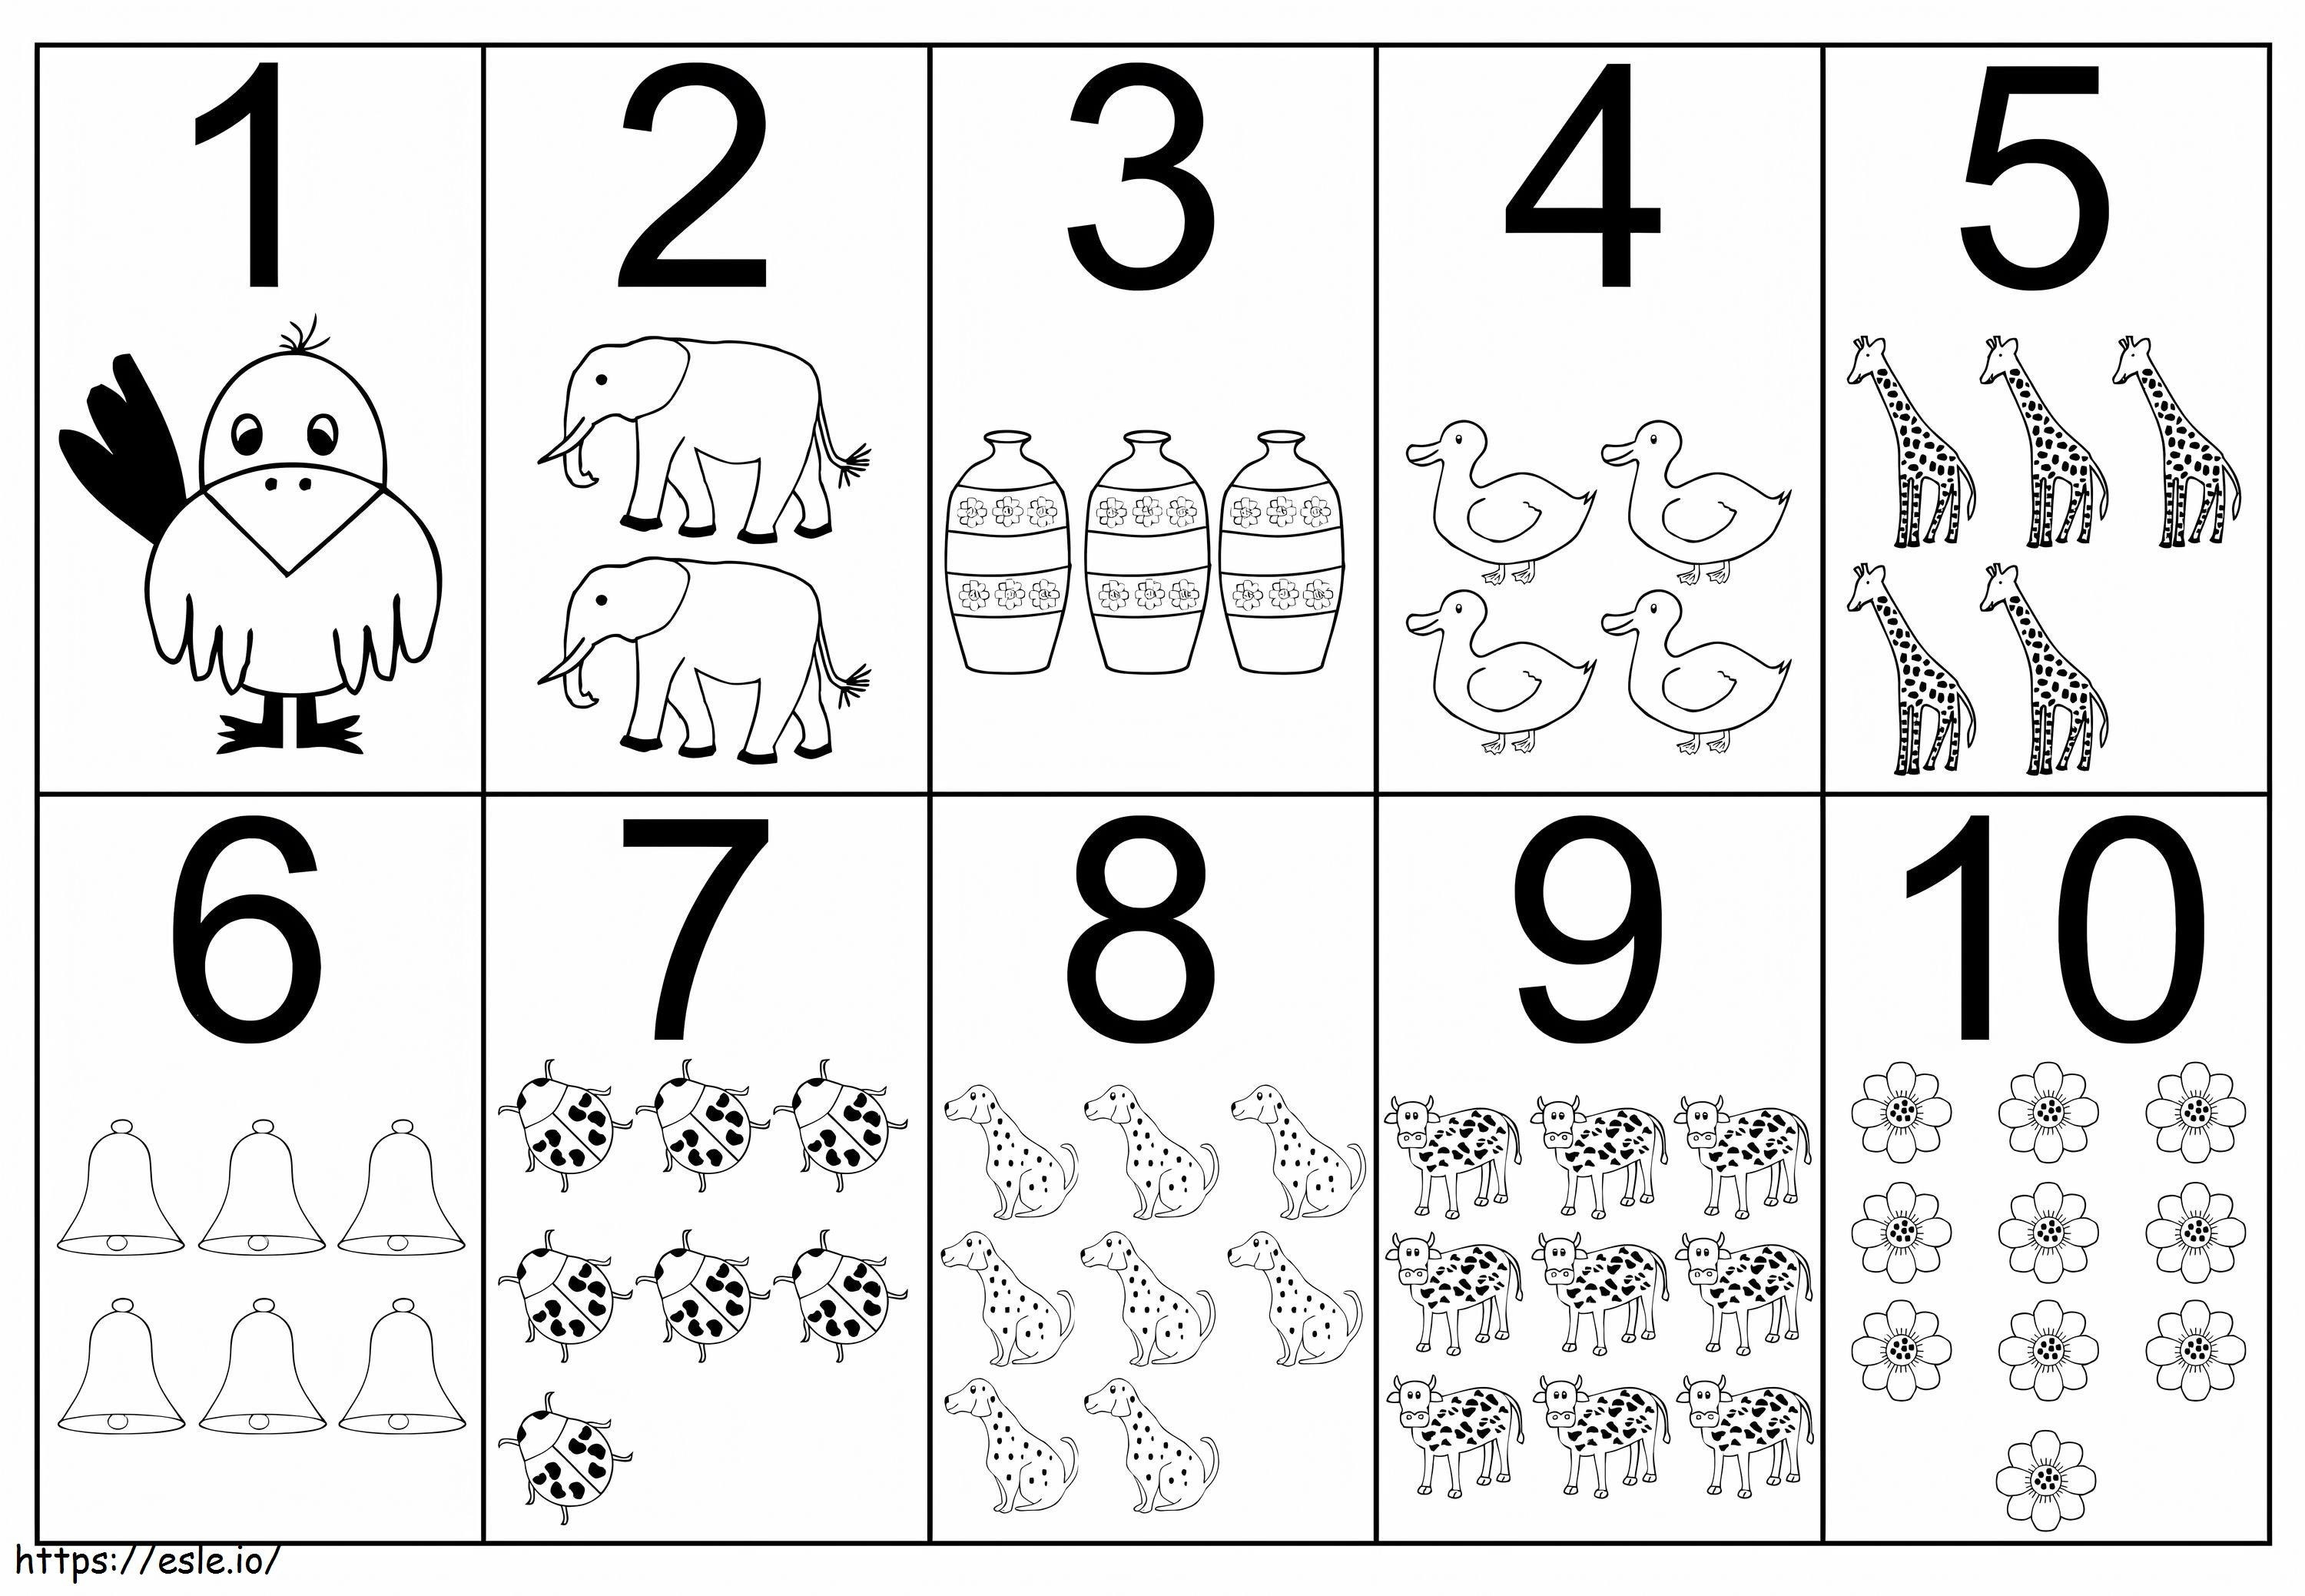 Images From 1 To 10 coloring page